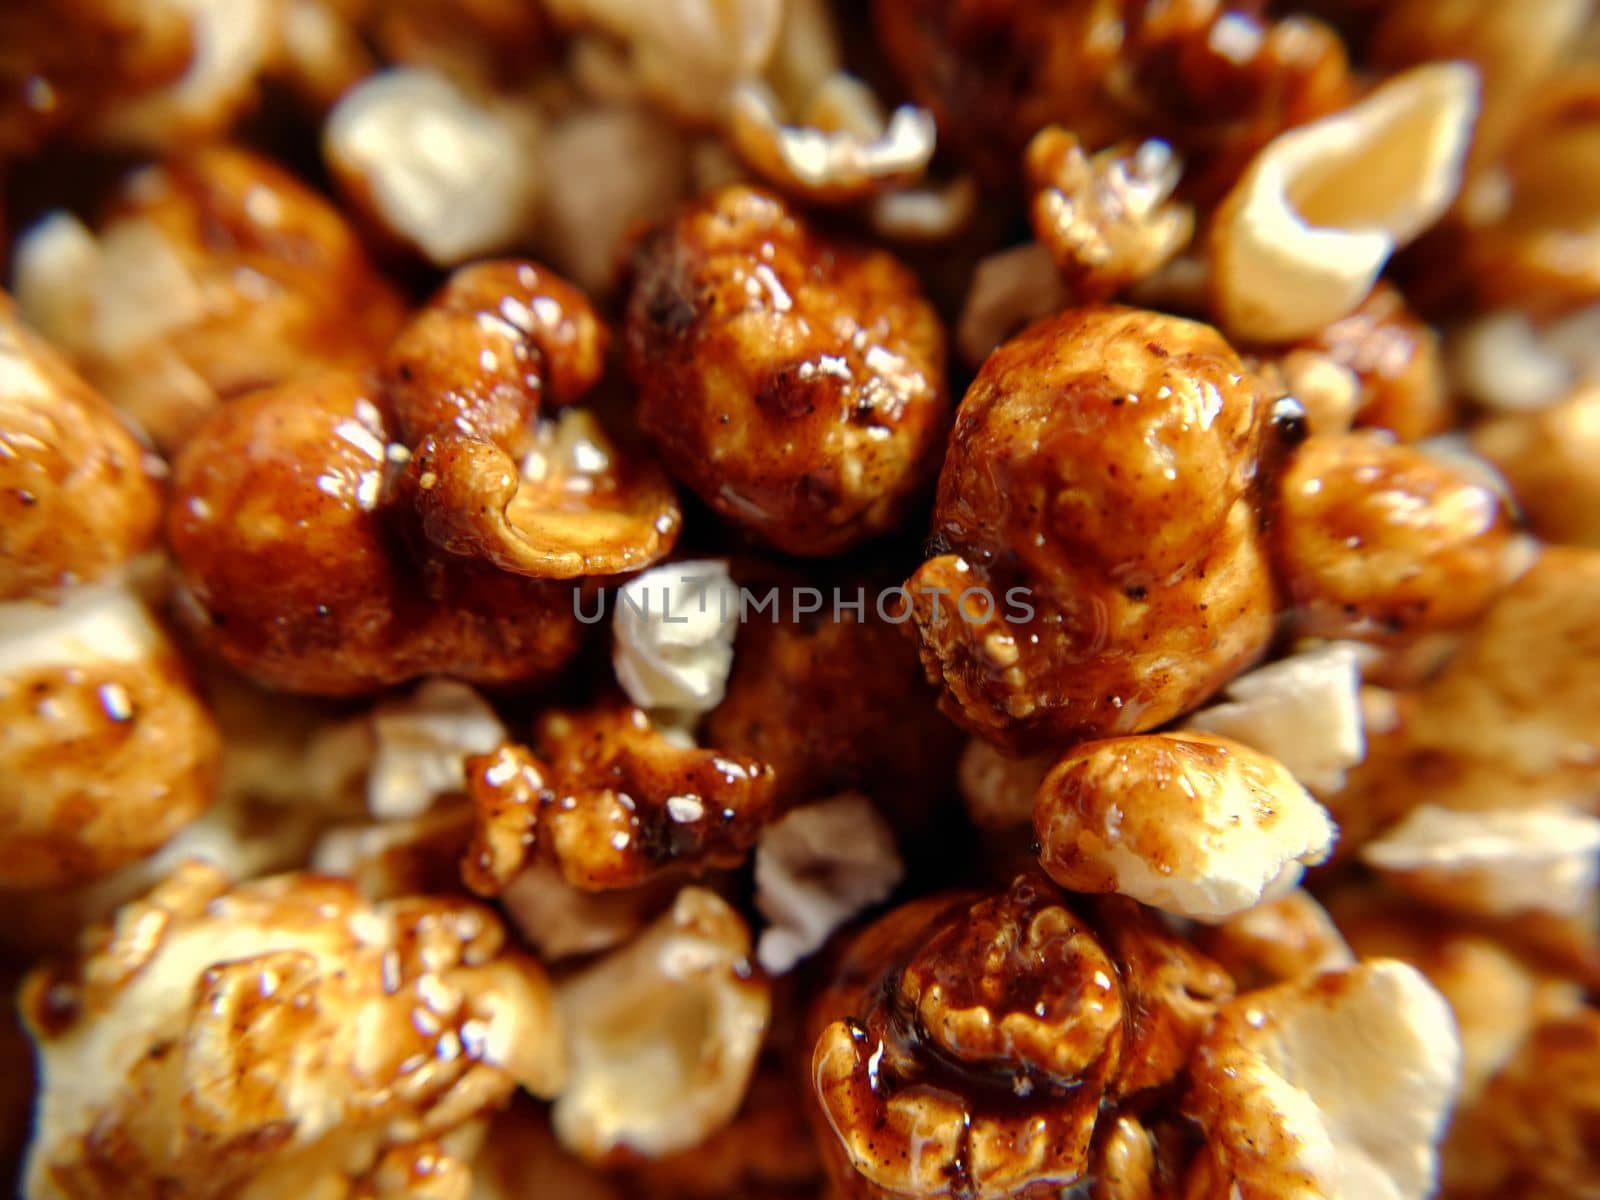 A handful of sweet popcorn with caramel close-up by Mastak80